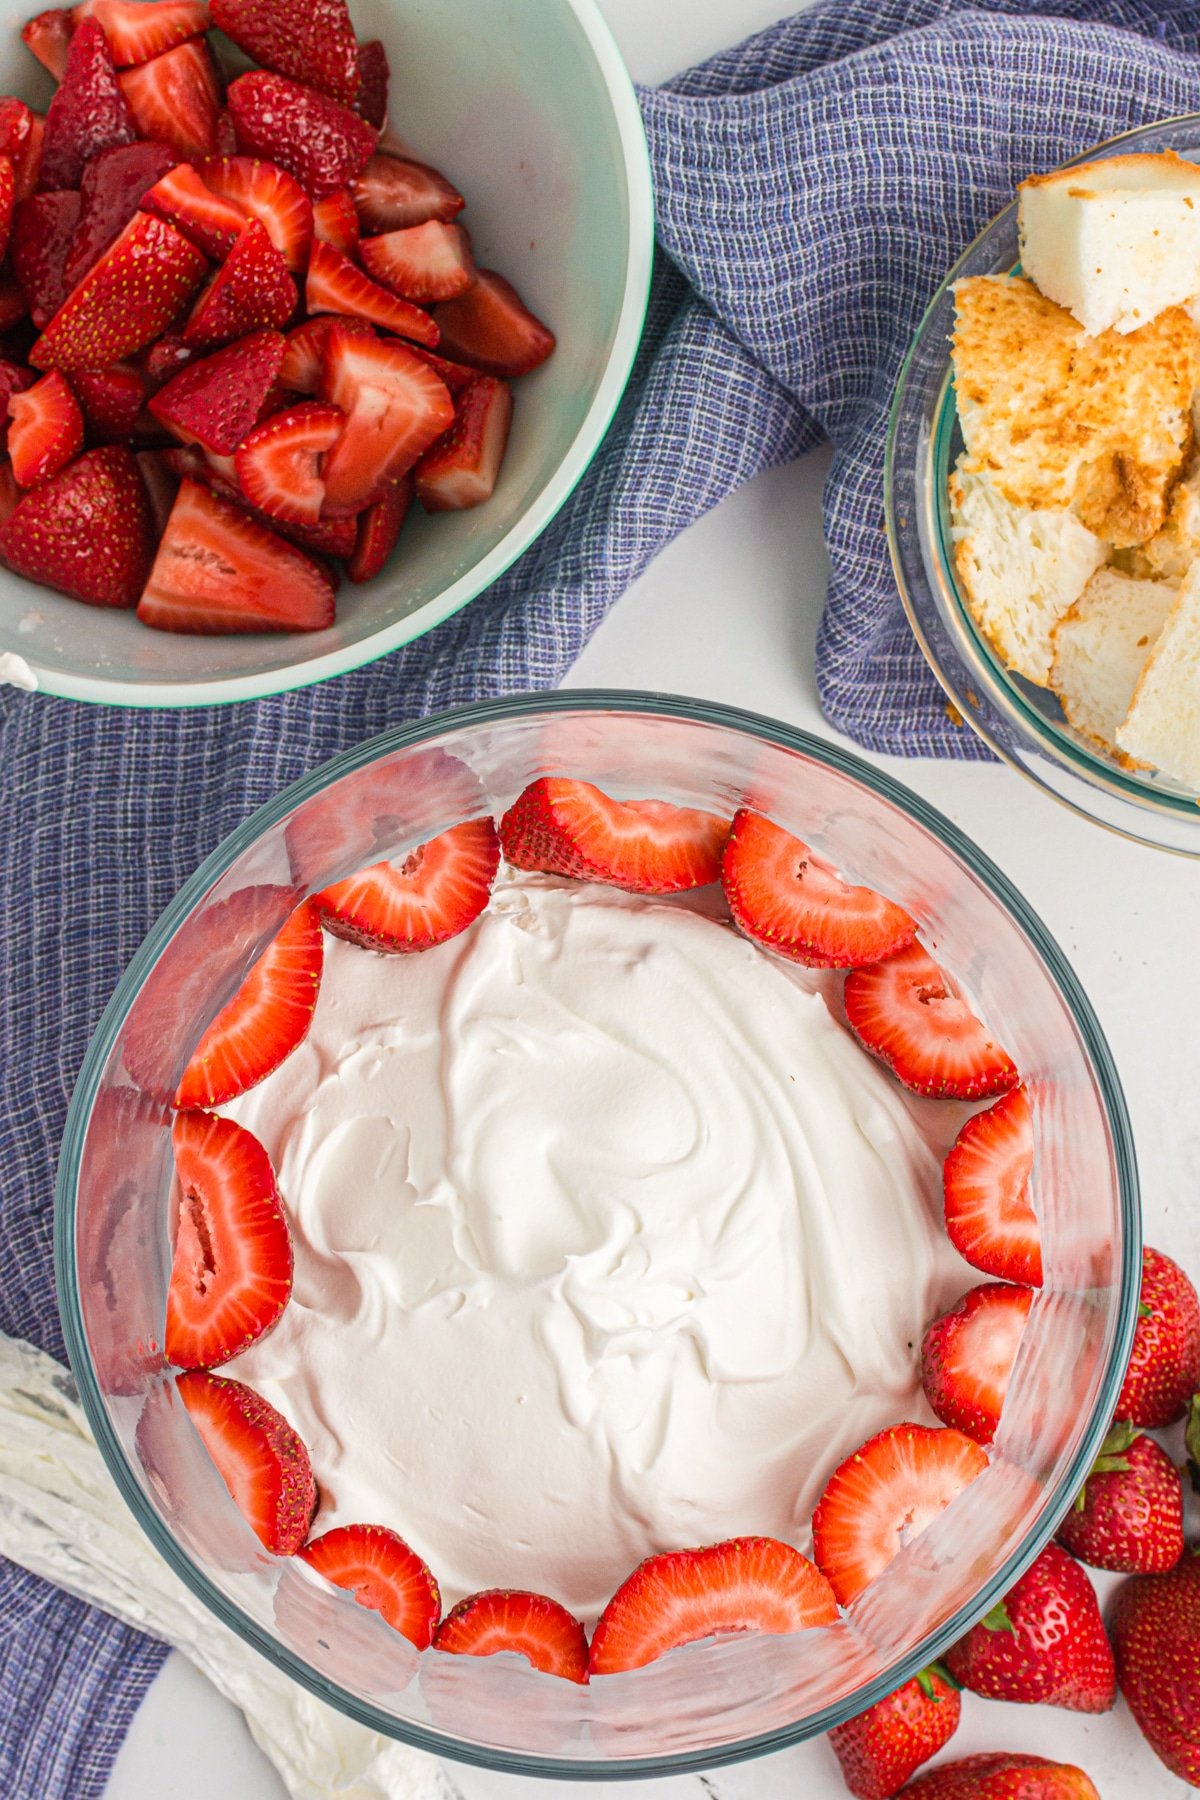 Putting strawberries in the Strawberry Trifle.